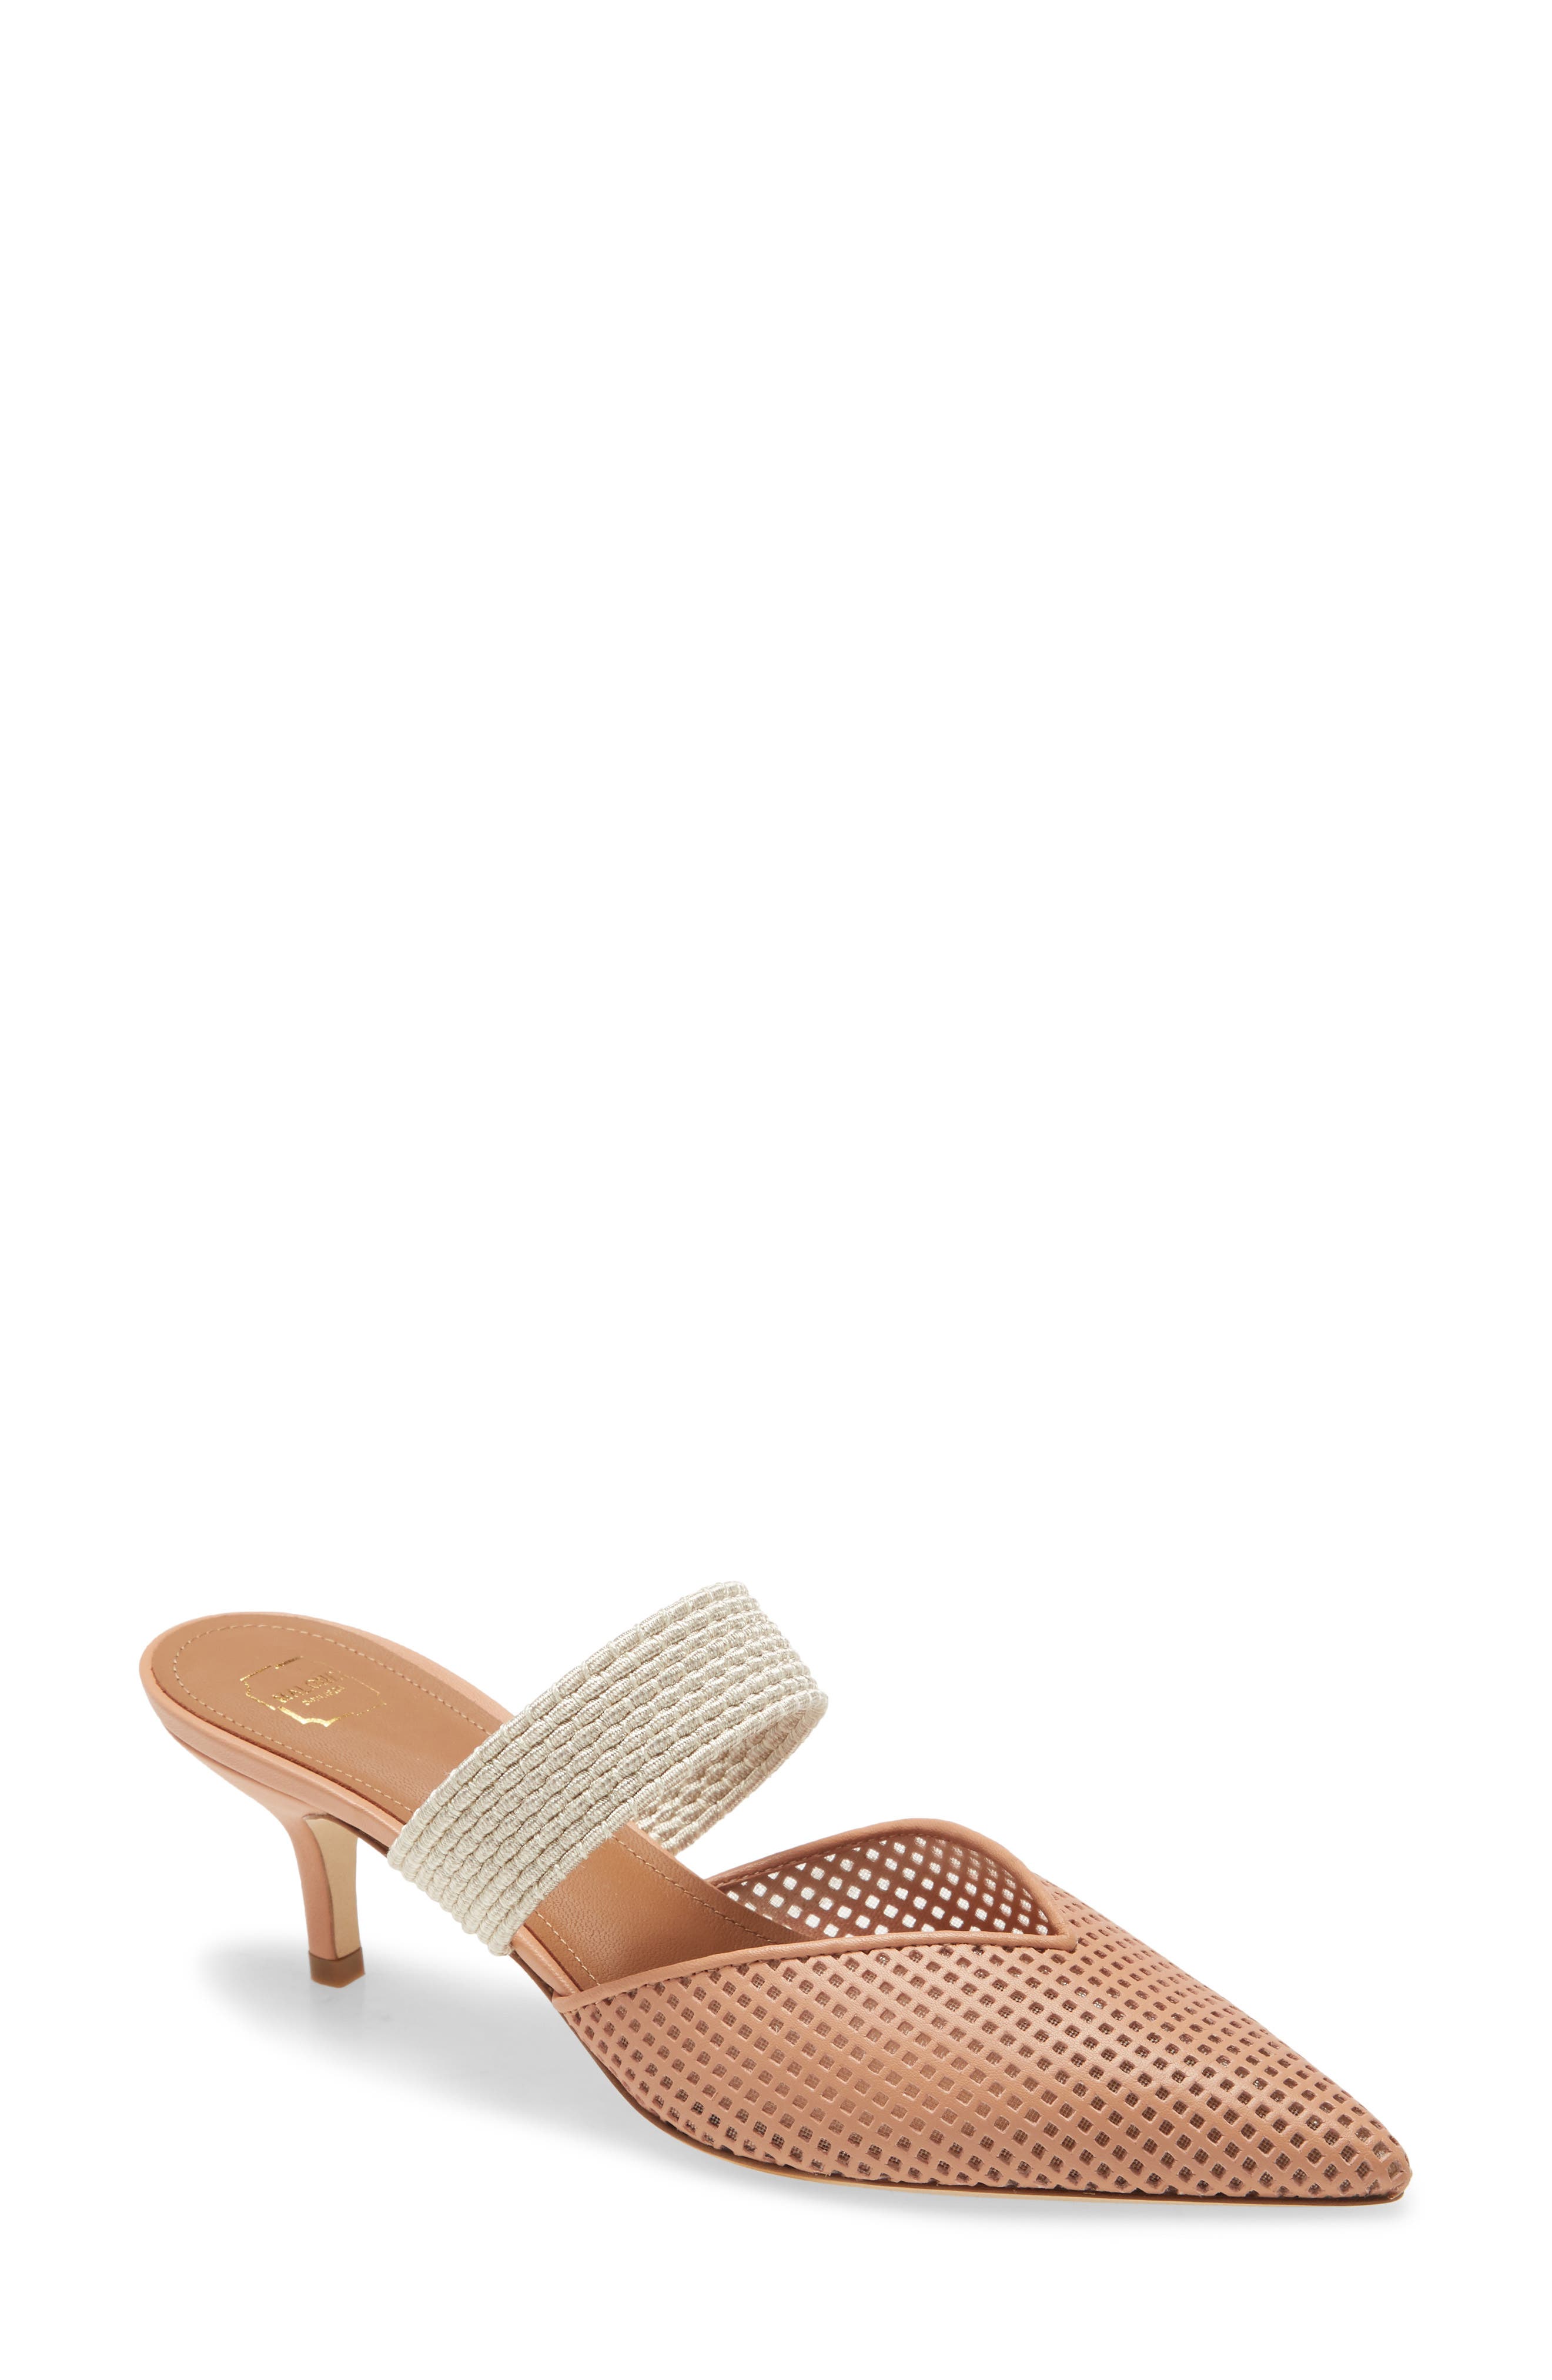 Malone Souliers | Nordstrom